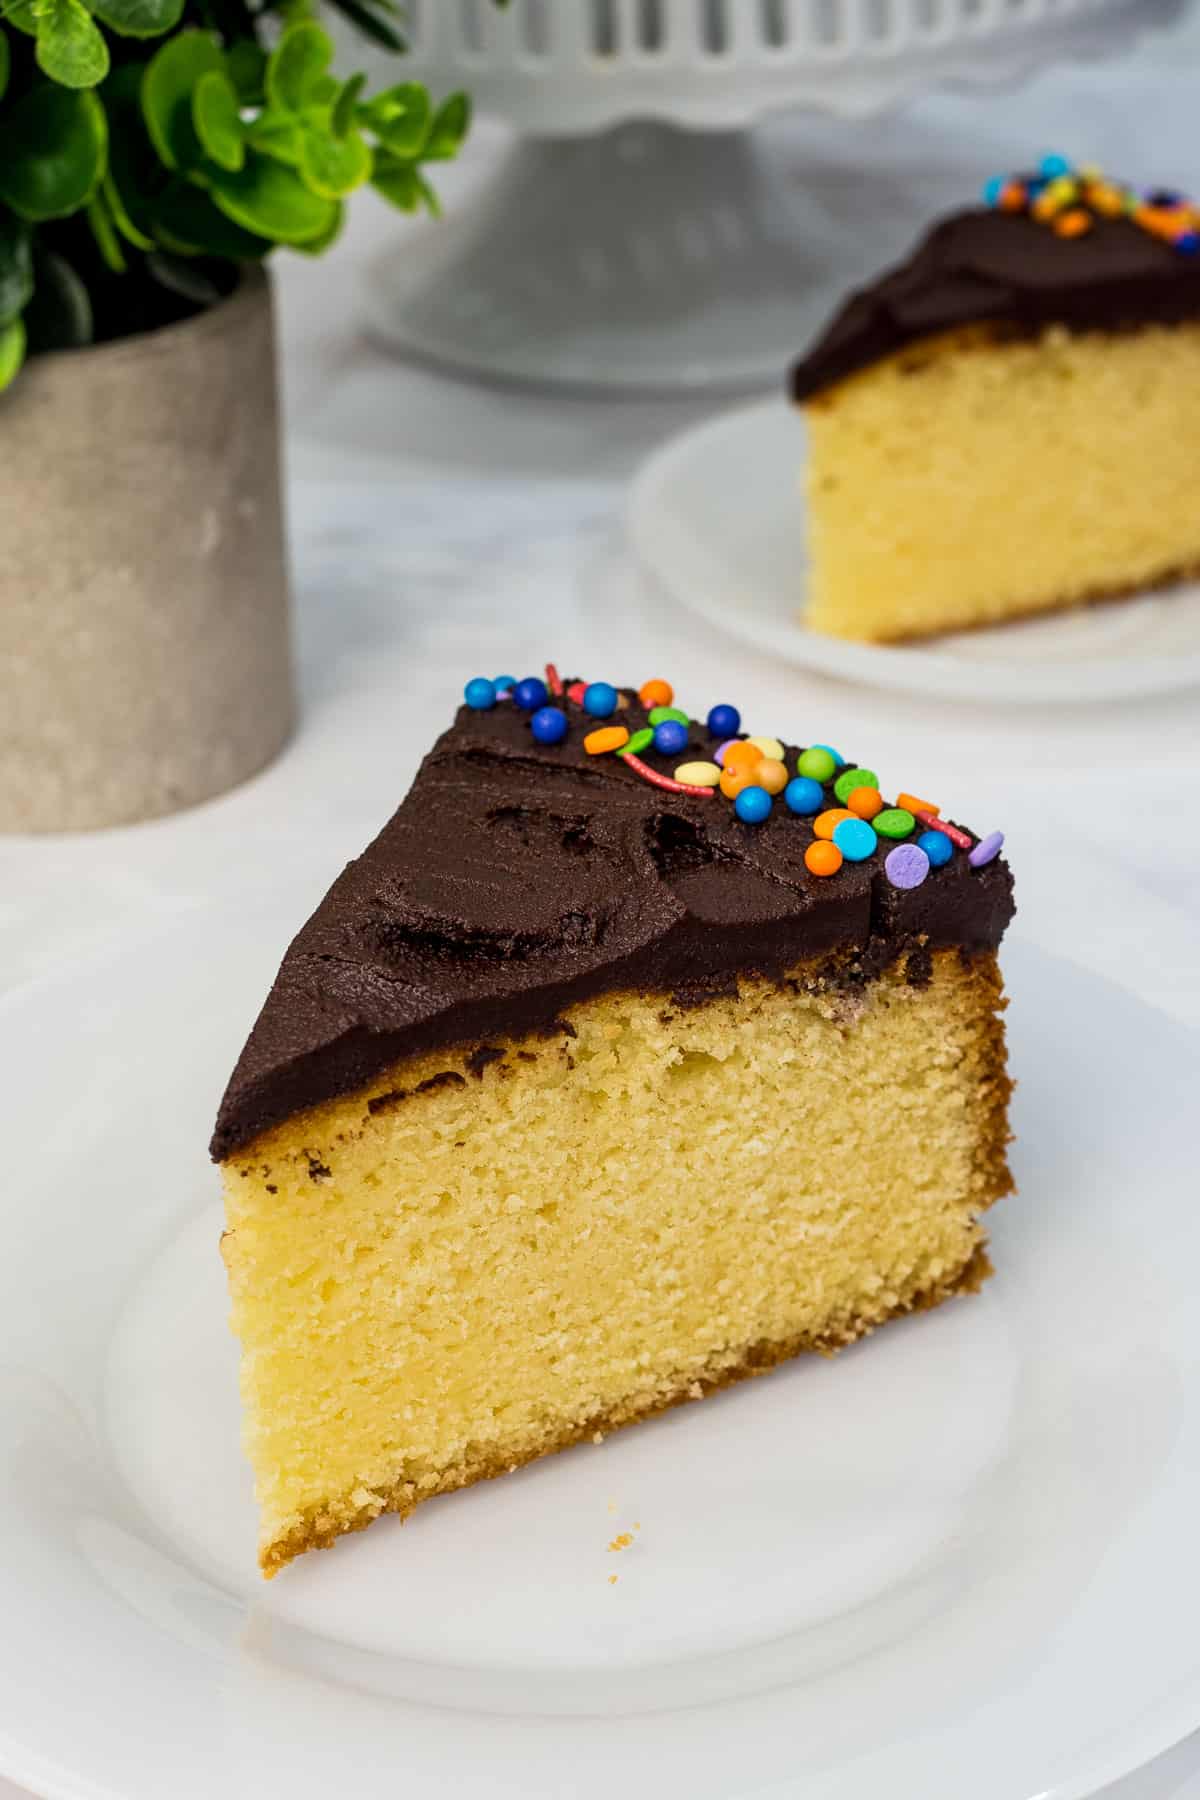 A slice of yellow cake with chocolate frosting on top, decorated with colorful sprinkles on the edges.